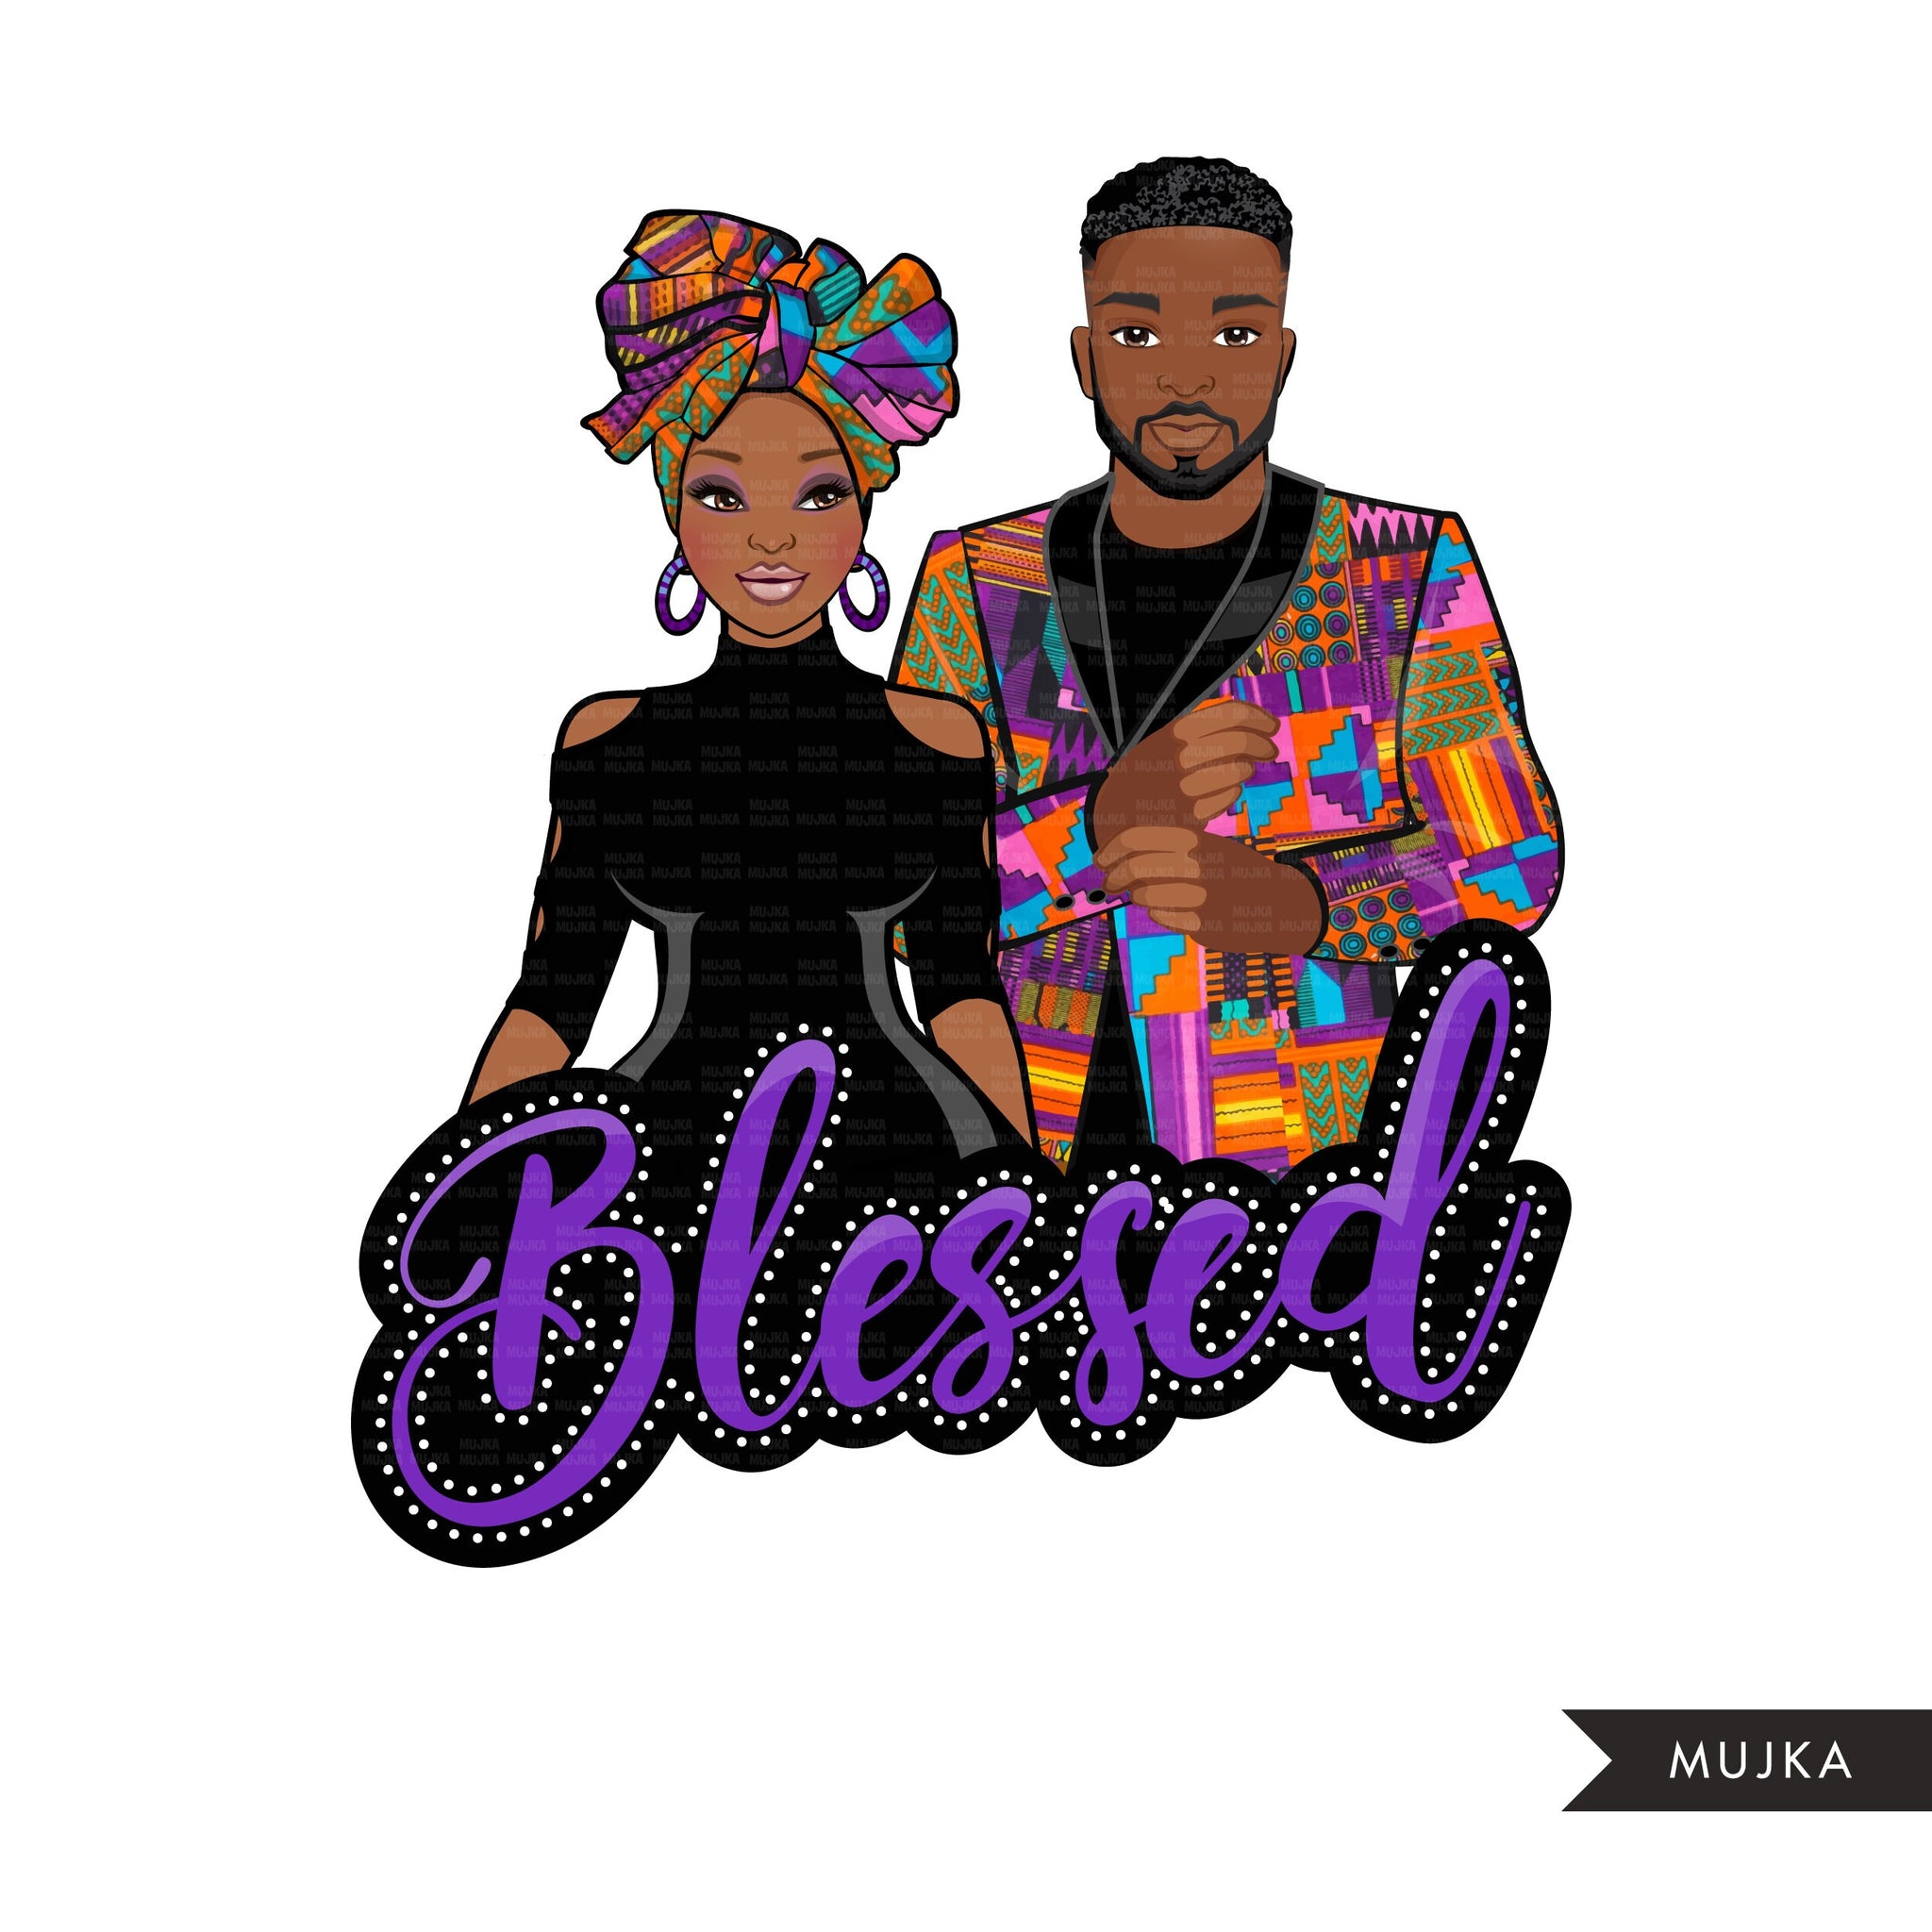 Afro black couple clipart, blessed png, Ankara couple sublimation designs, fashion clipart